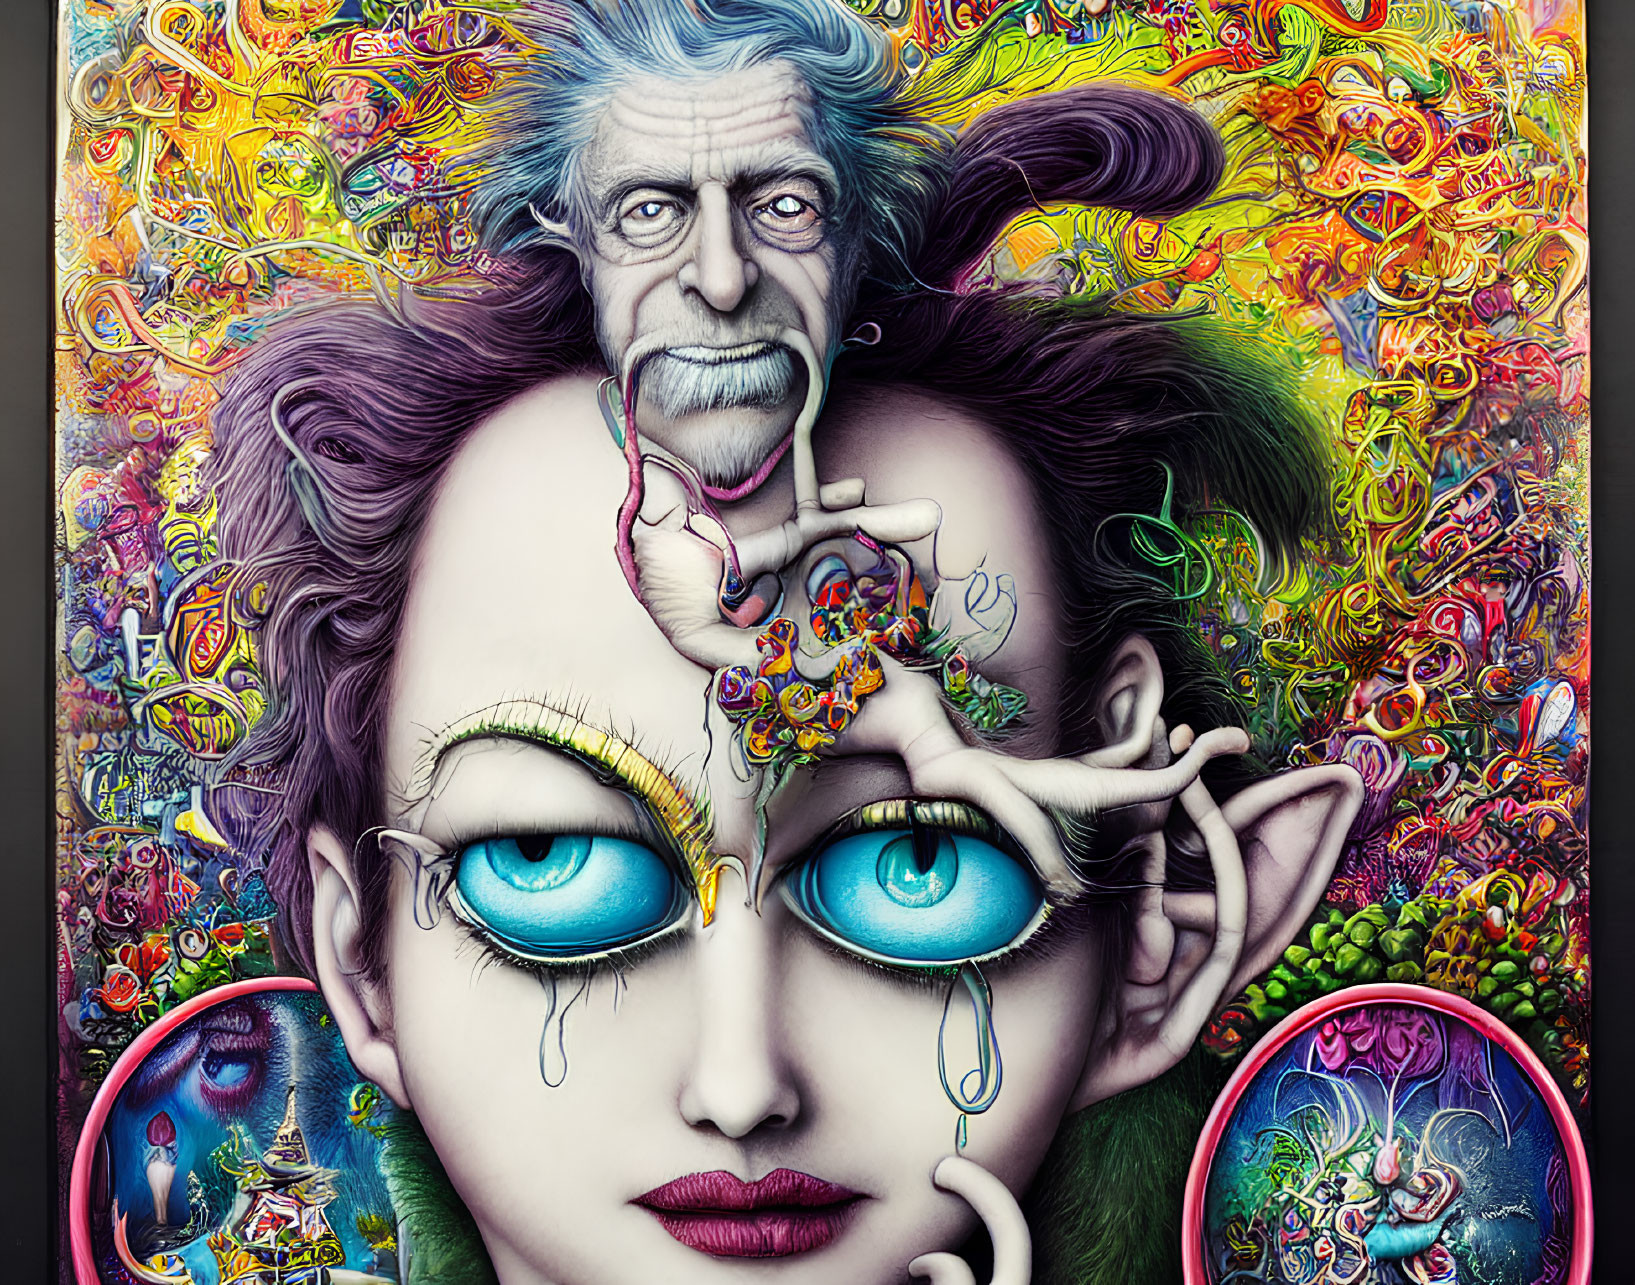 Colorful artwork features elderly man, quirky expression, psychedelic background, and elfin figure